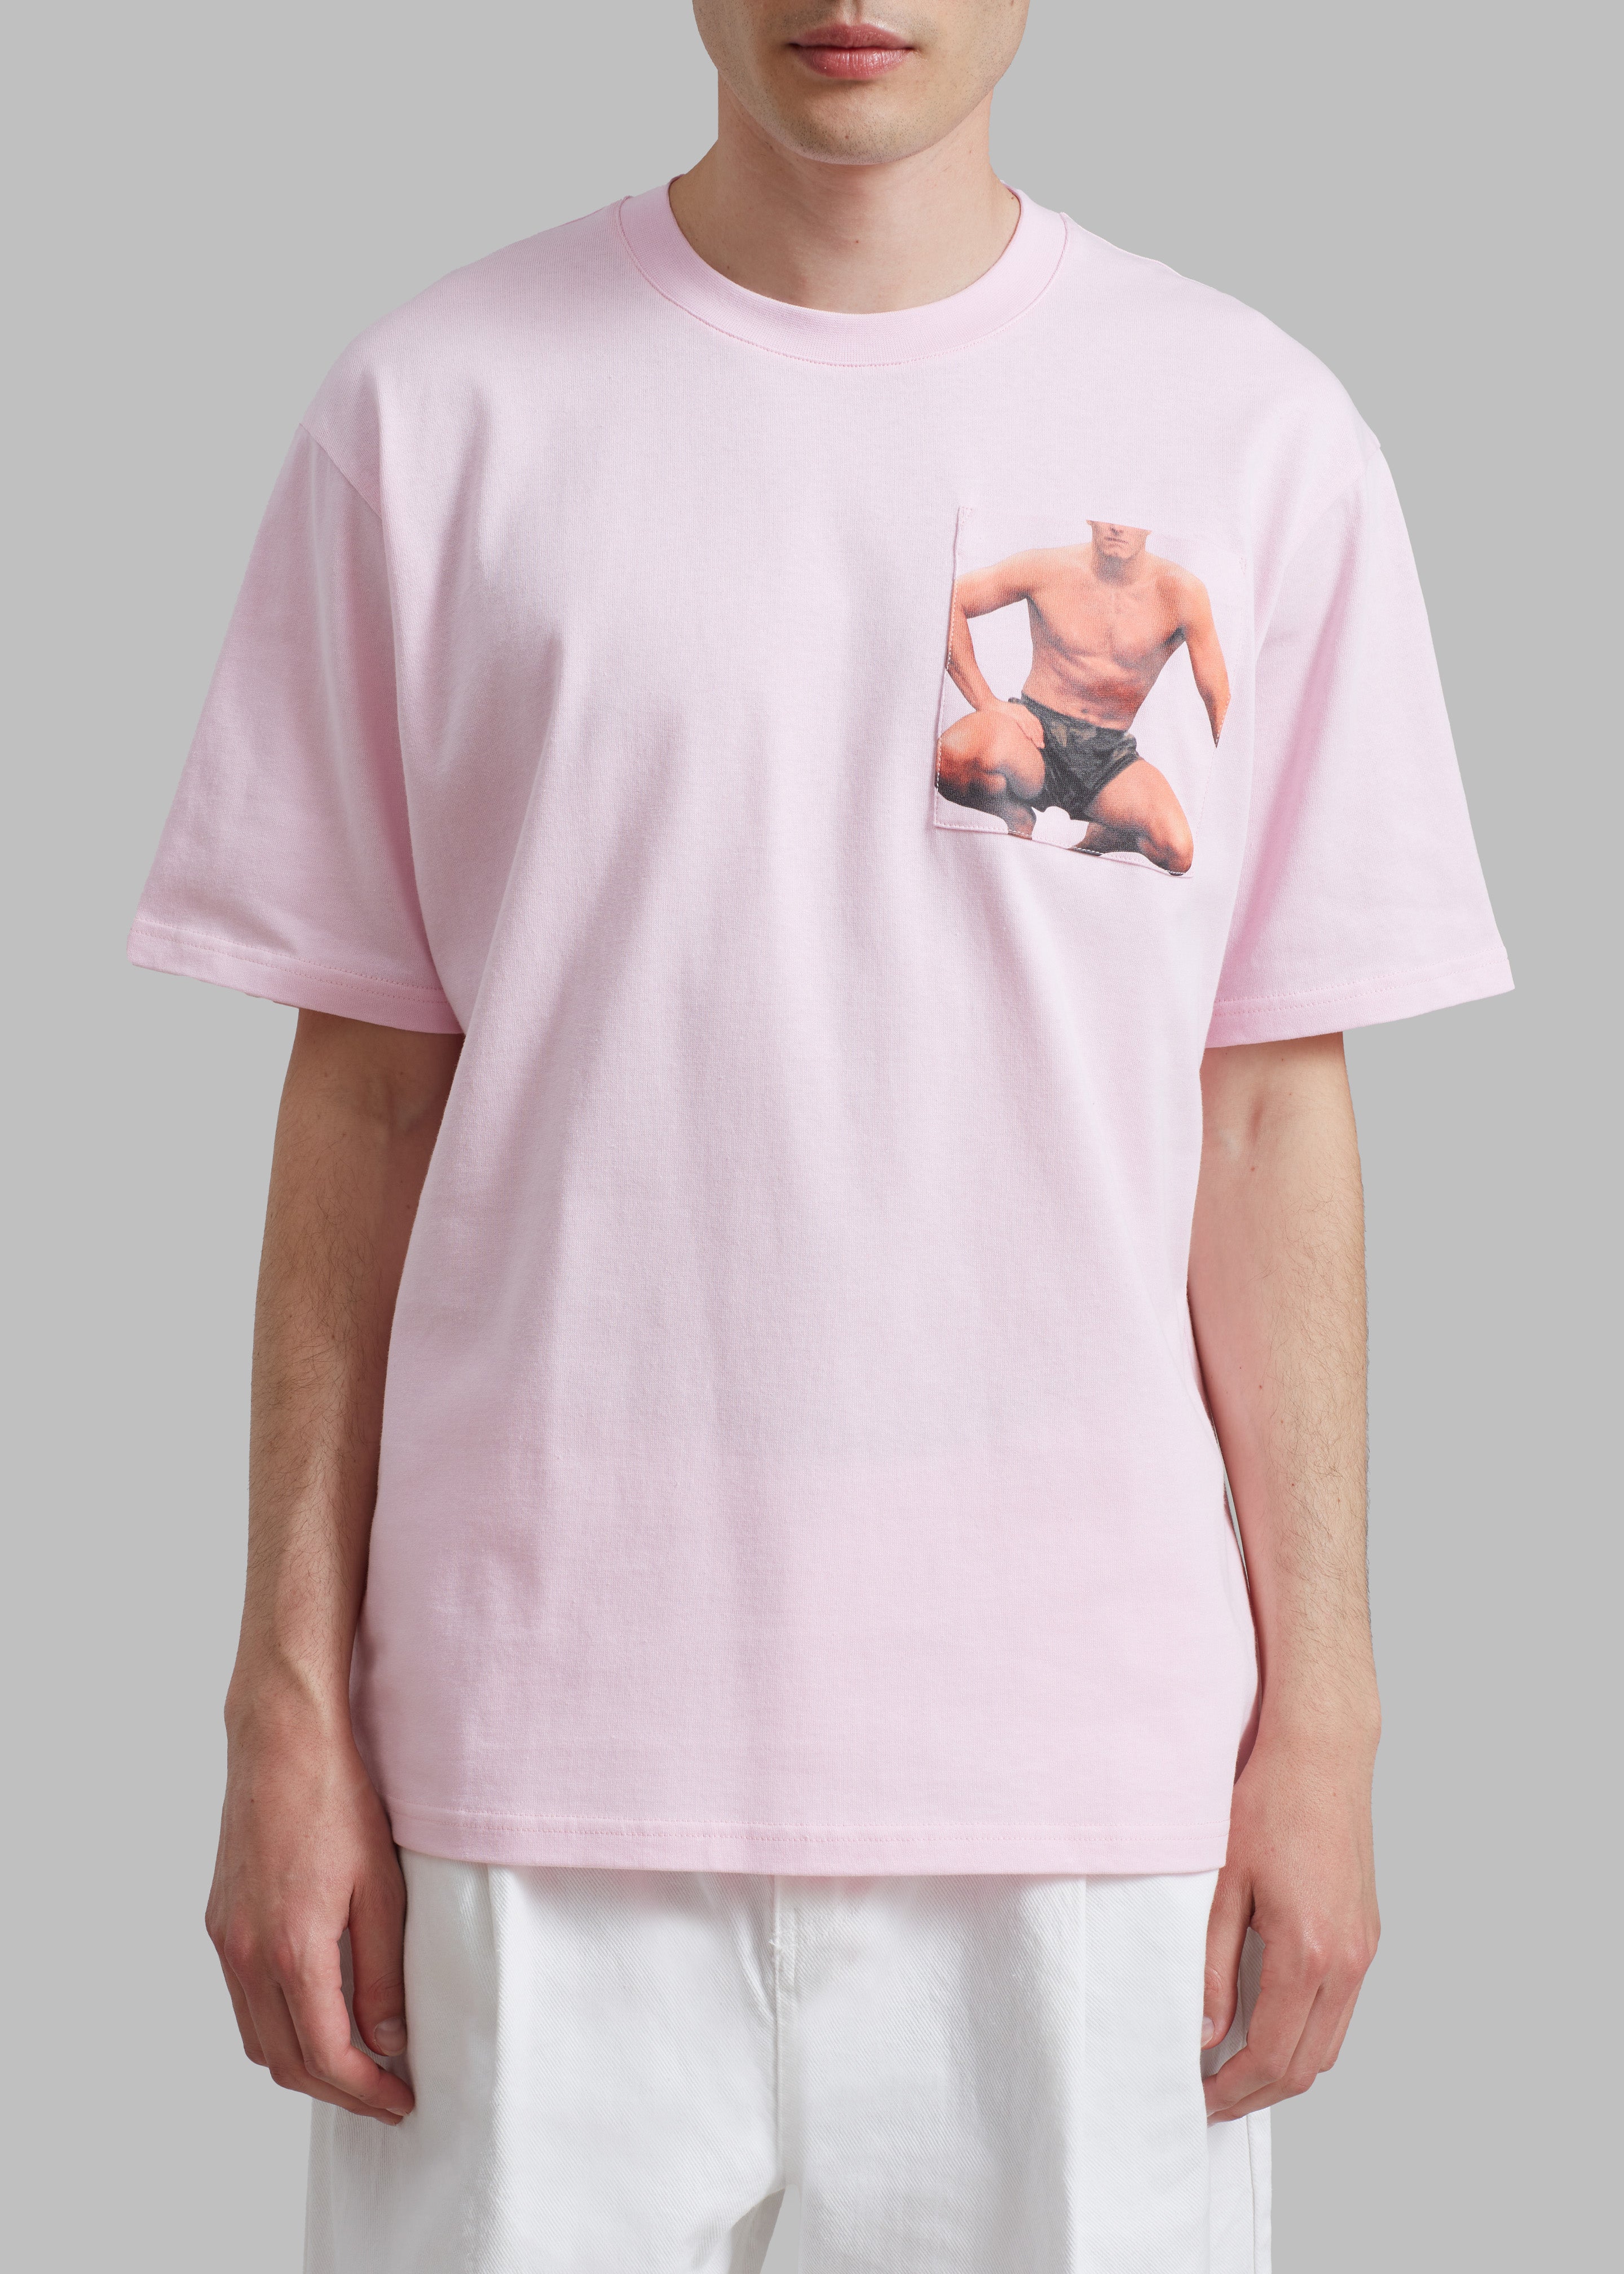 JW Anderson Crouching Stud Chest Pocket T-Shirt - Pink - 4